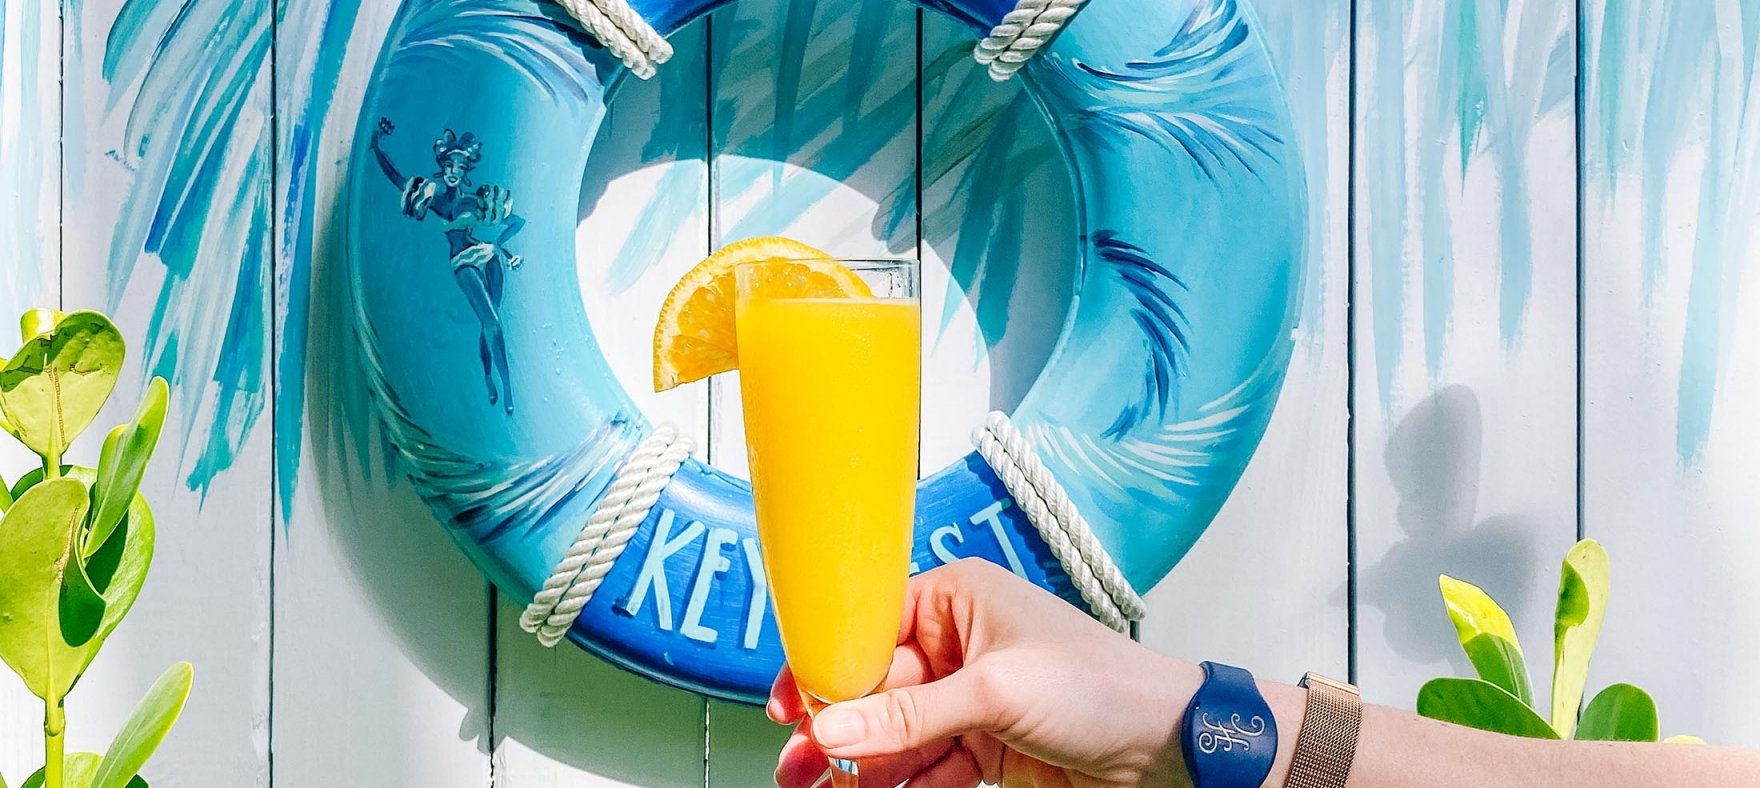 A hand holding a glass of mimosa against a background with an inflatable pool ring